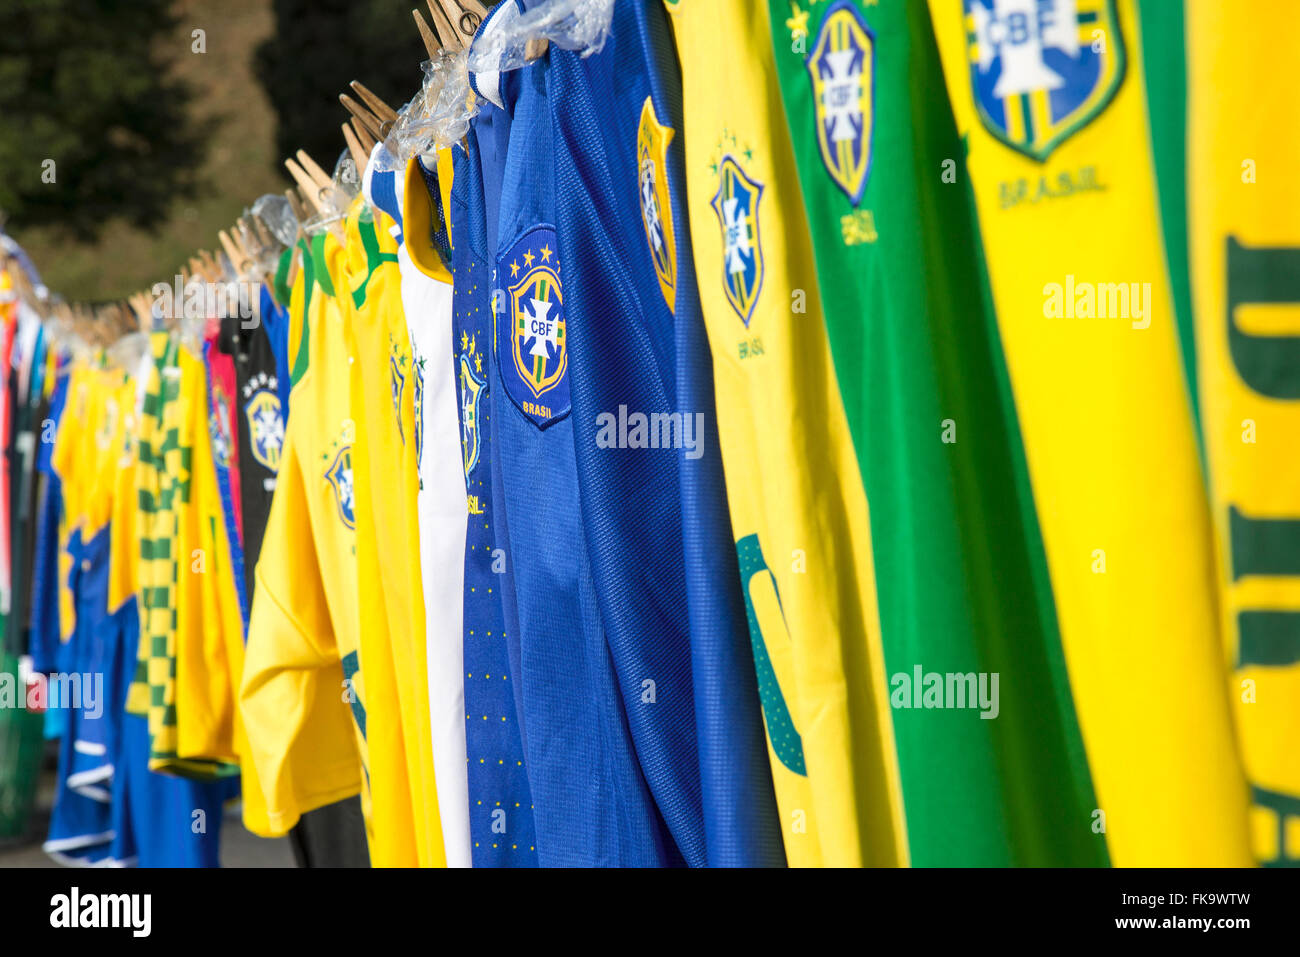 Sale of Brazilian selection of shirts in front of Estadio do Pacaembu during the World Cup Stock Photo